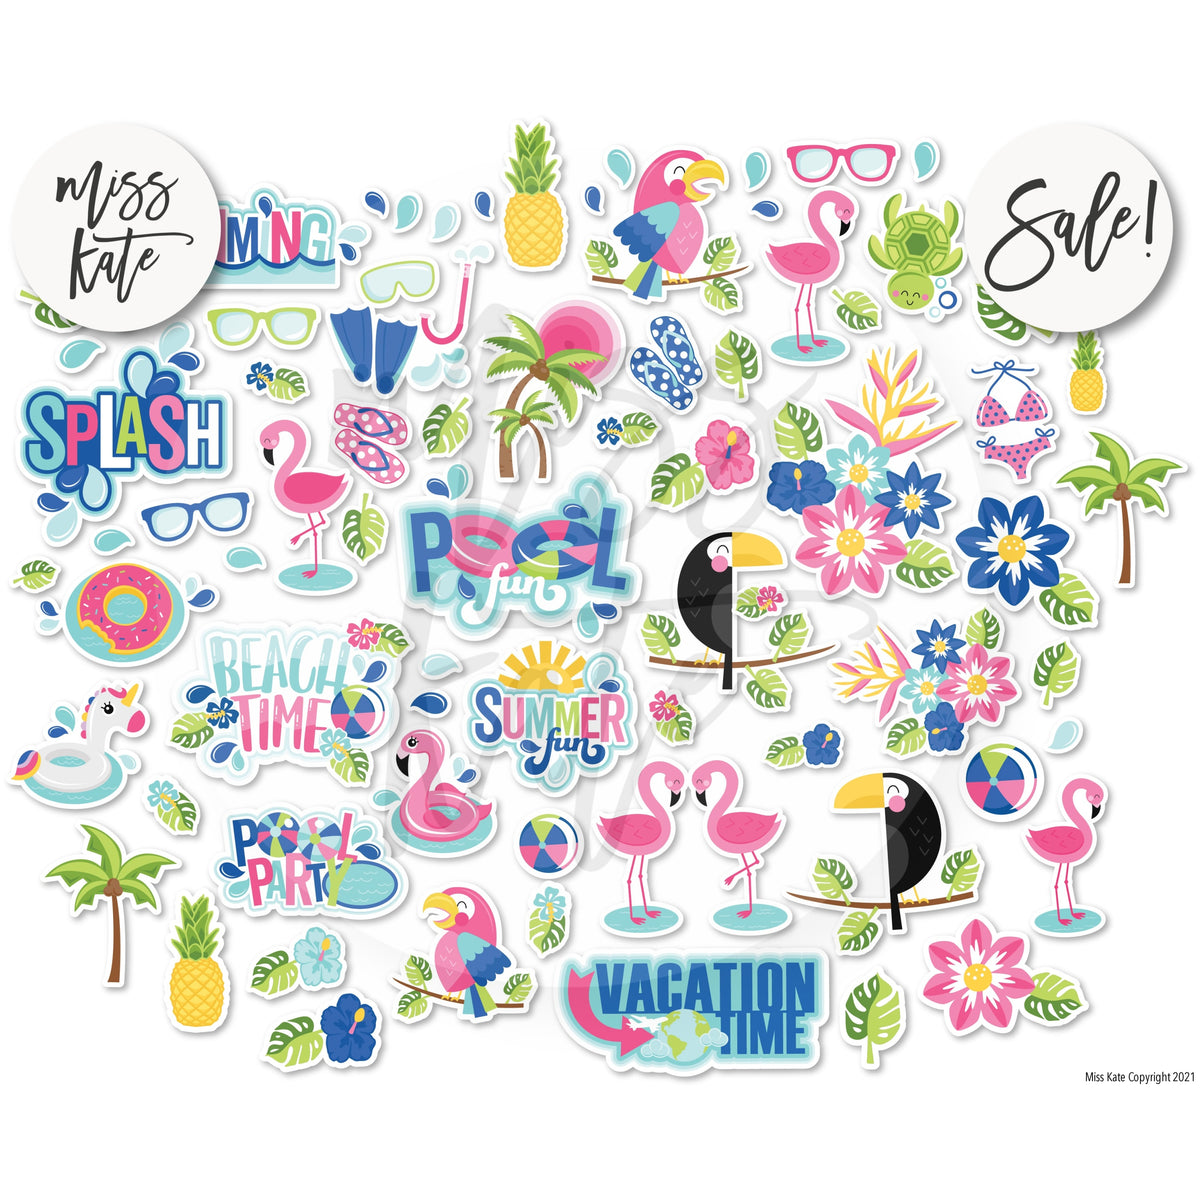 Defined scrapbook stickers, Paper, 8x11, Vacation (Making Memories)